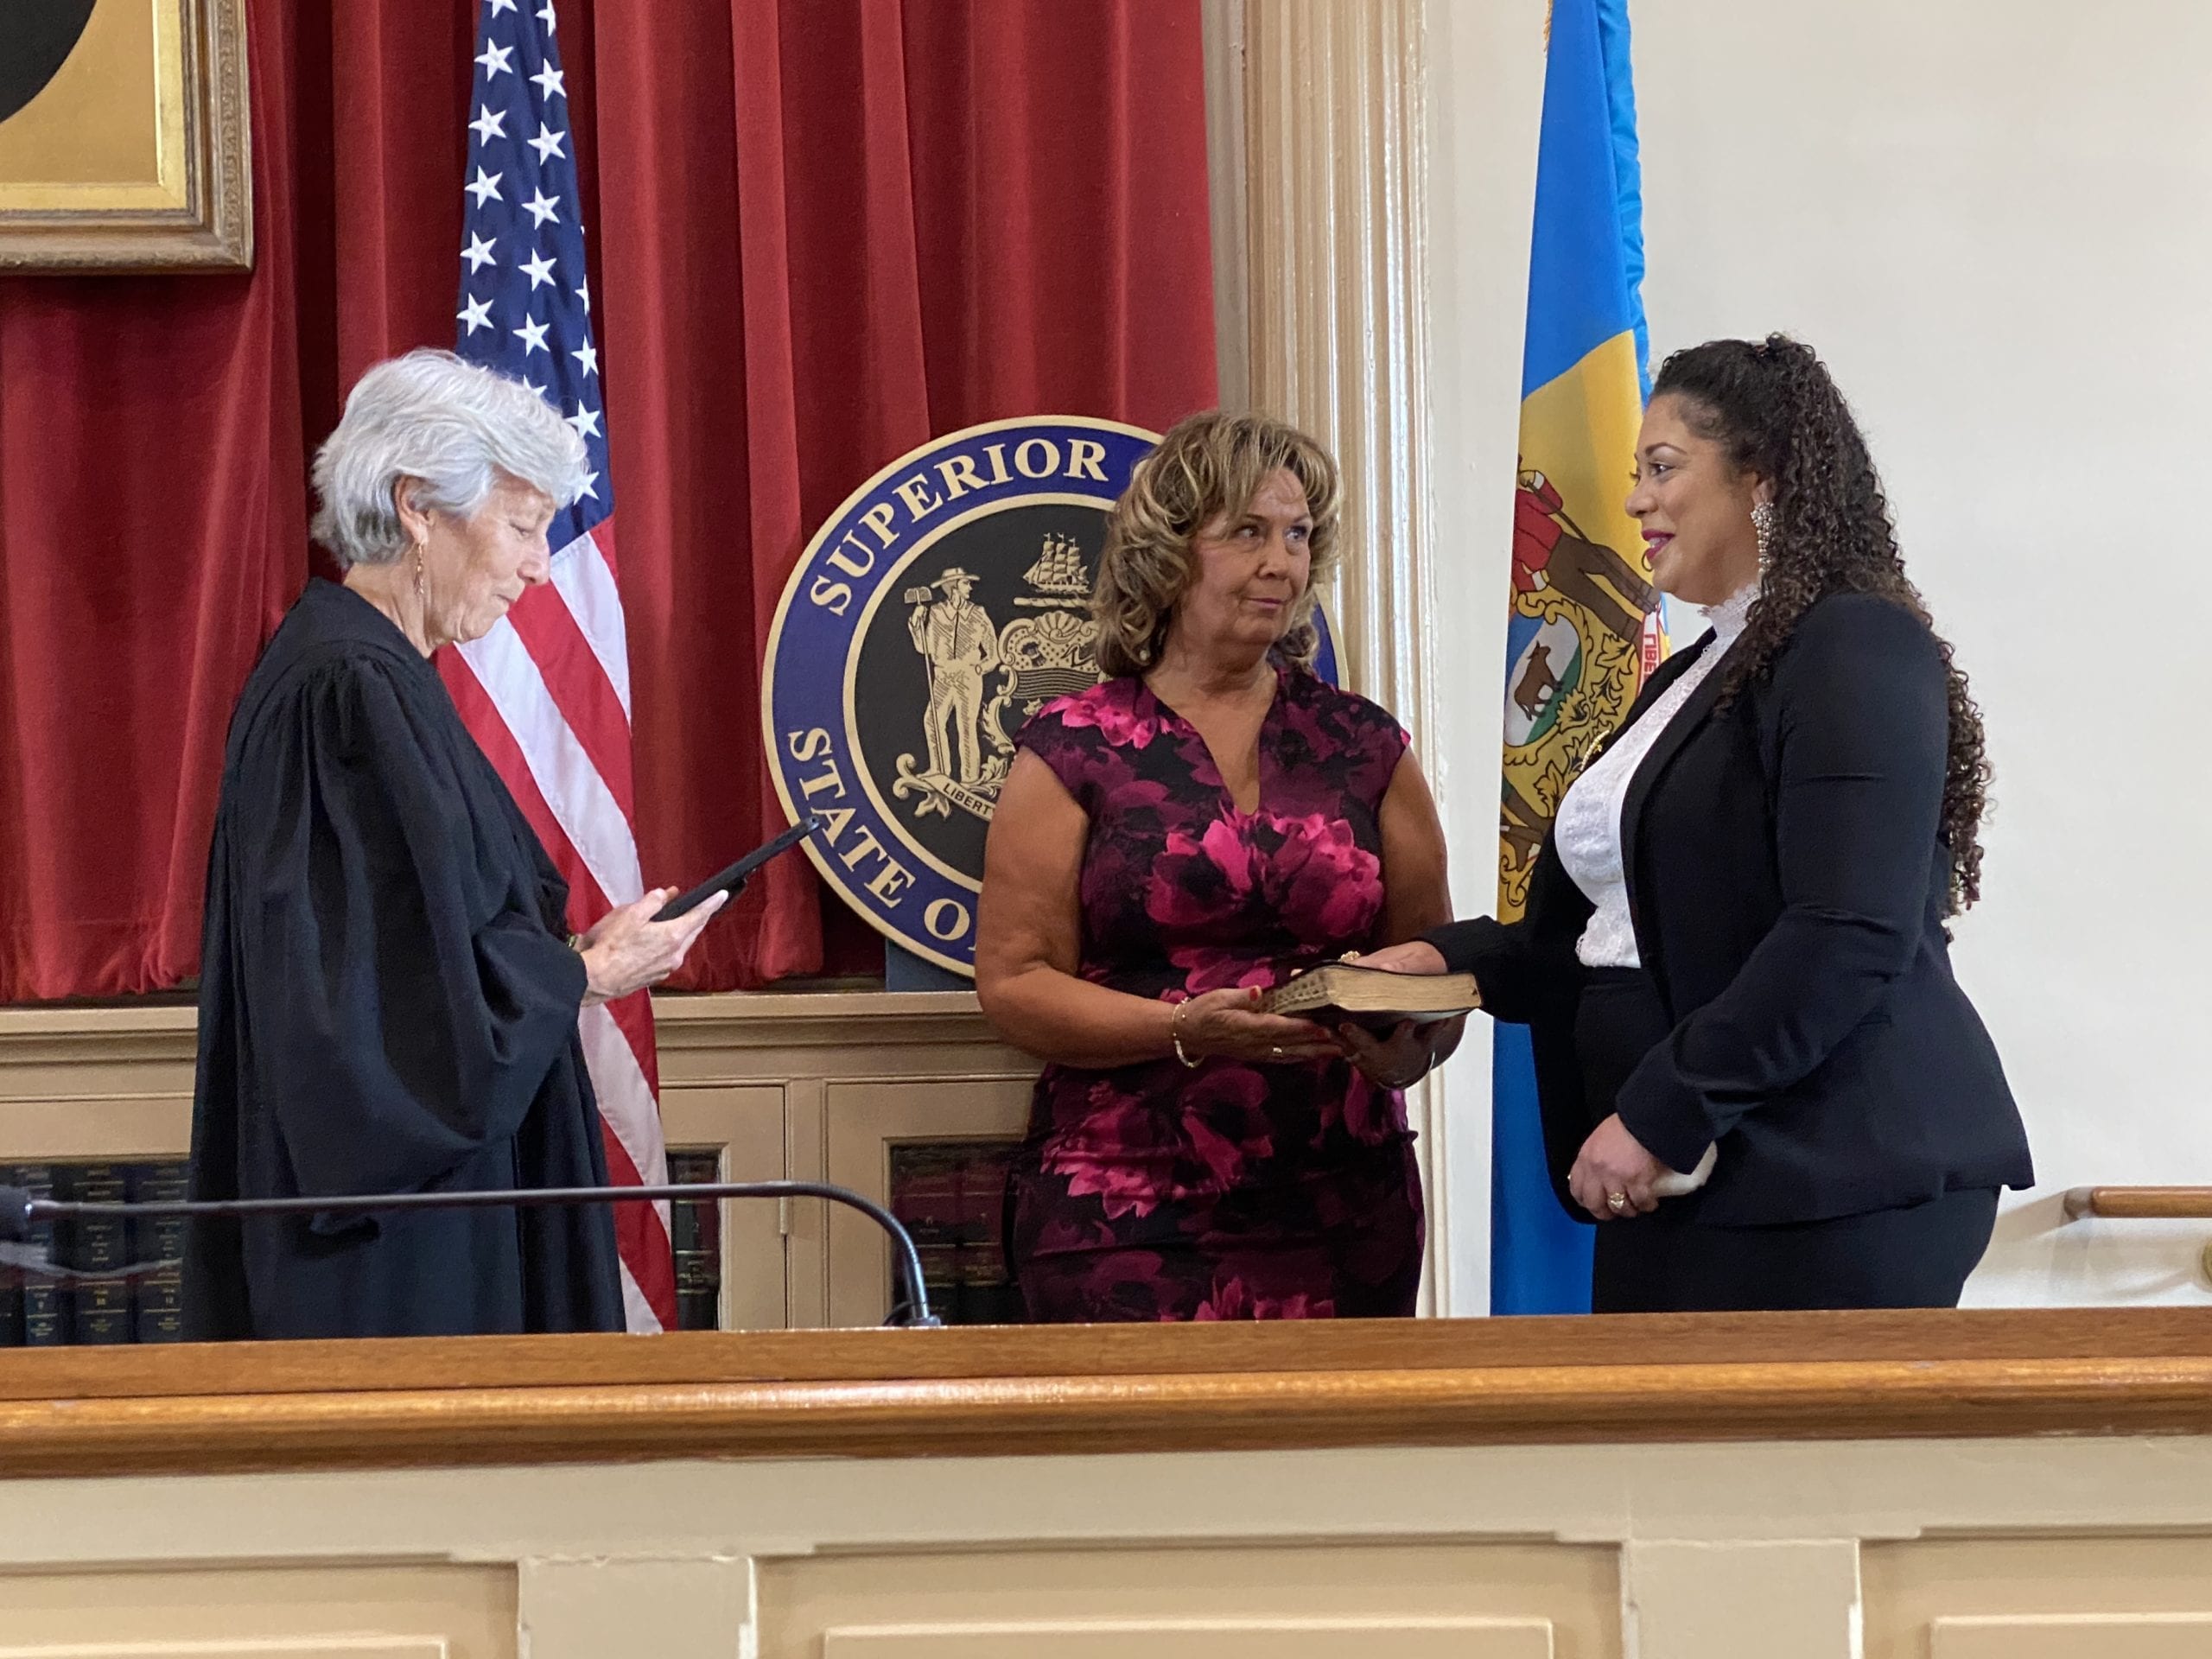 Featured image for “The Honorable Reneta Green-Streett is sworn in as Superior Court Judge”